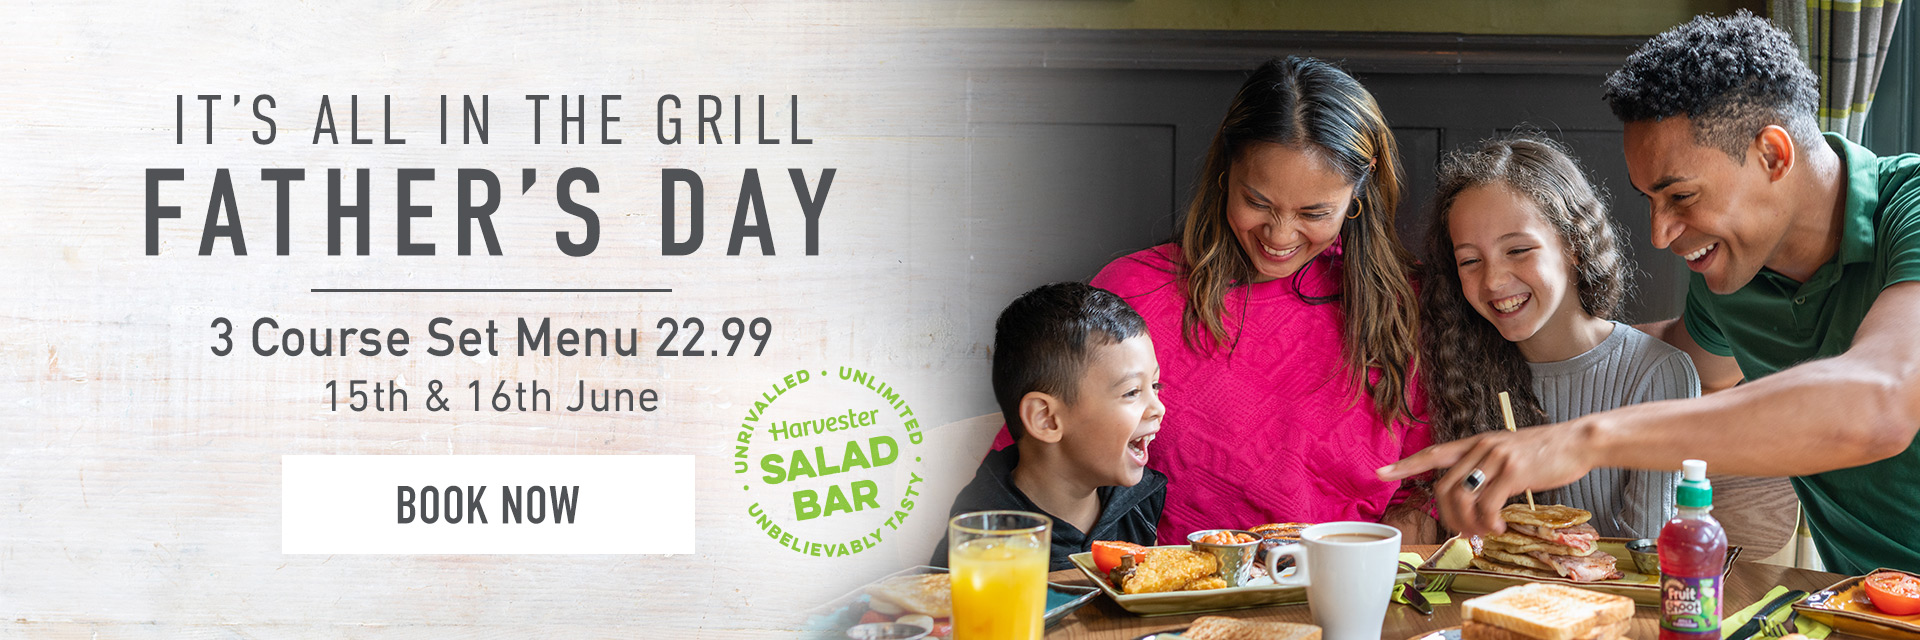 Father’s Day at Harvester Alwalton